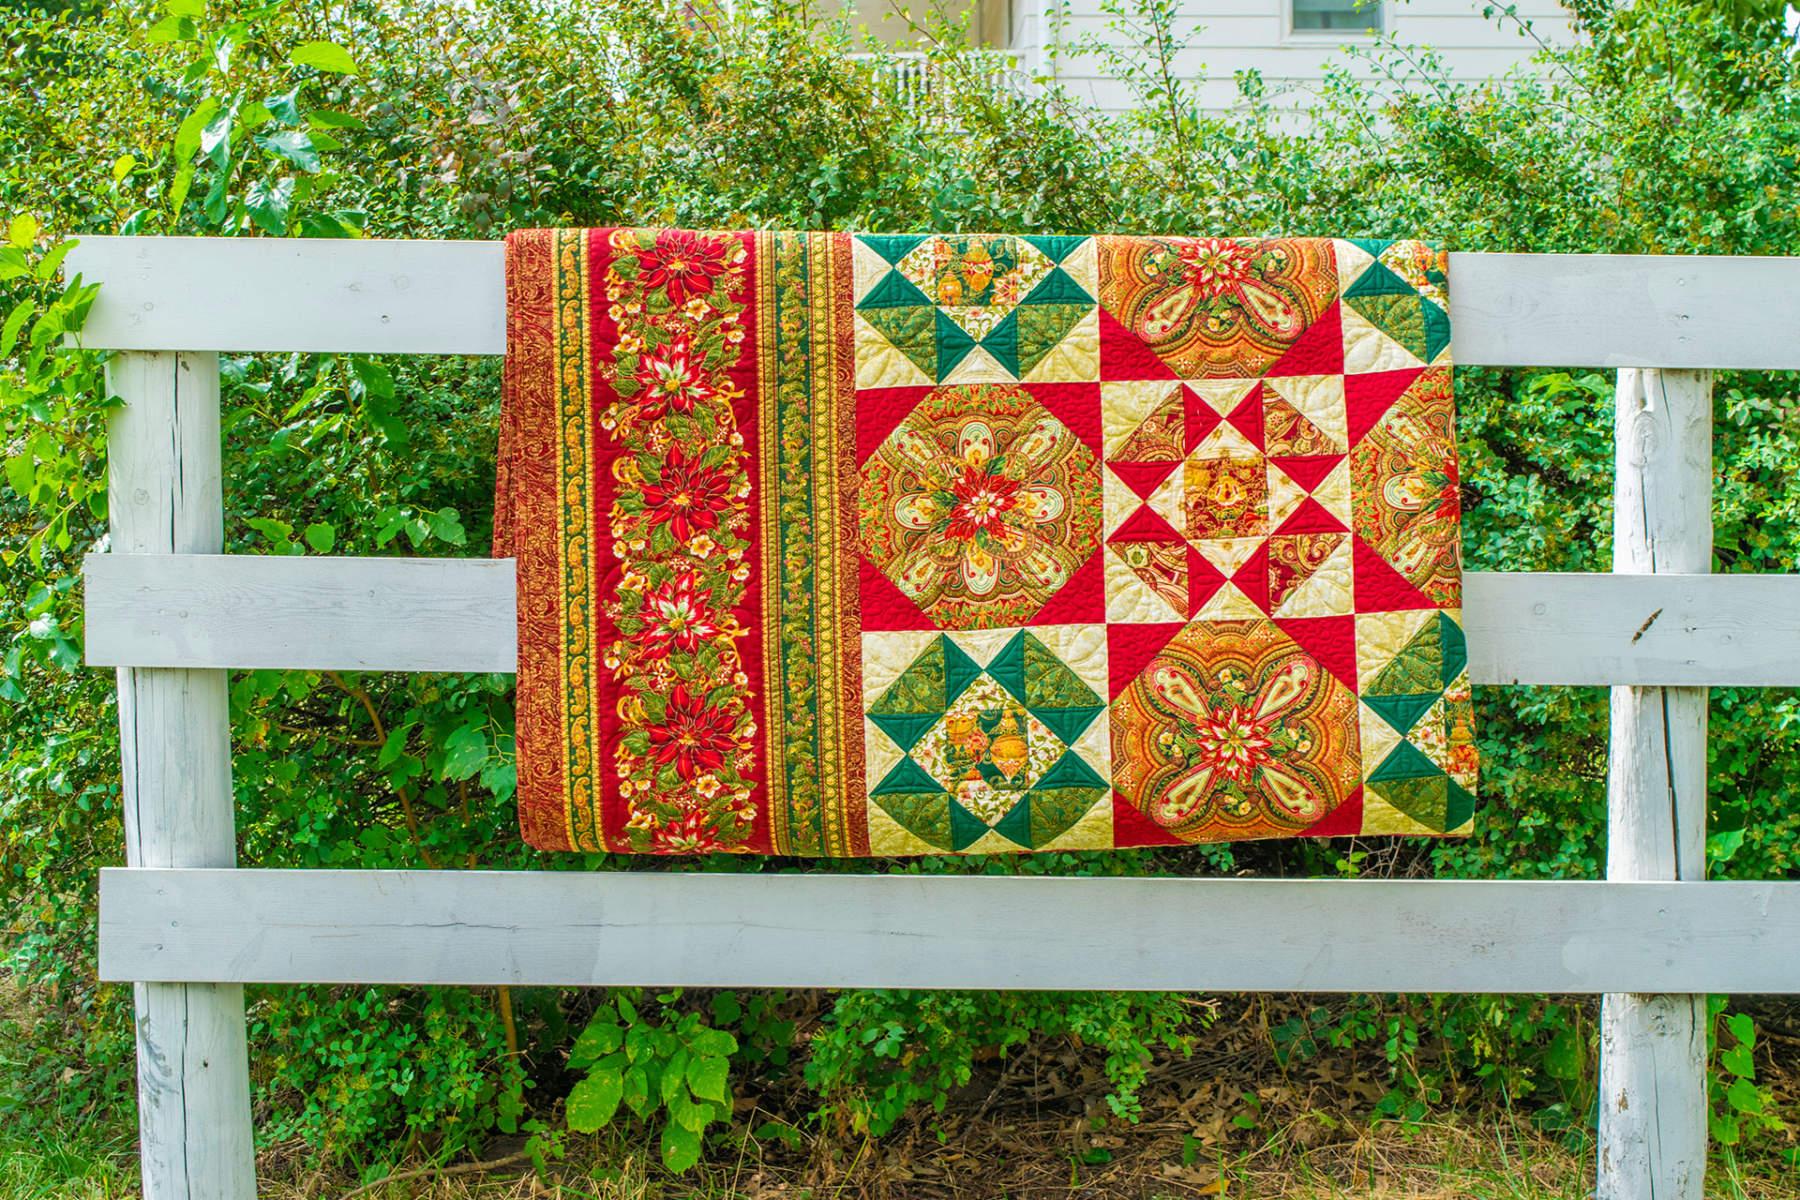 christmas quilts